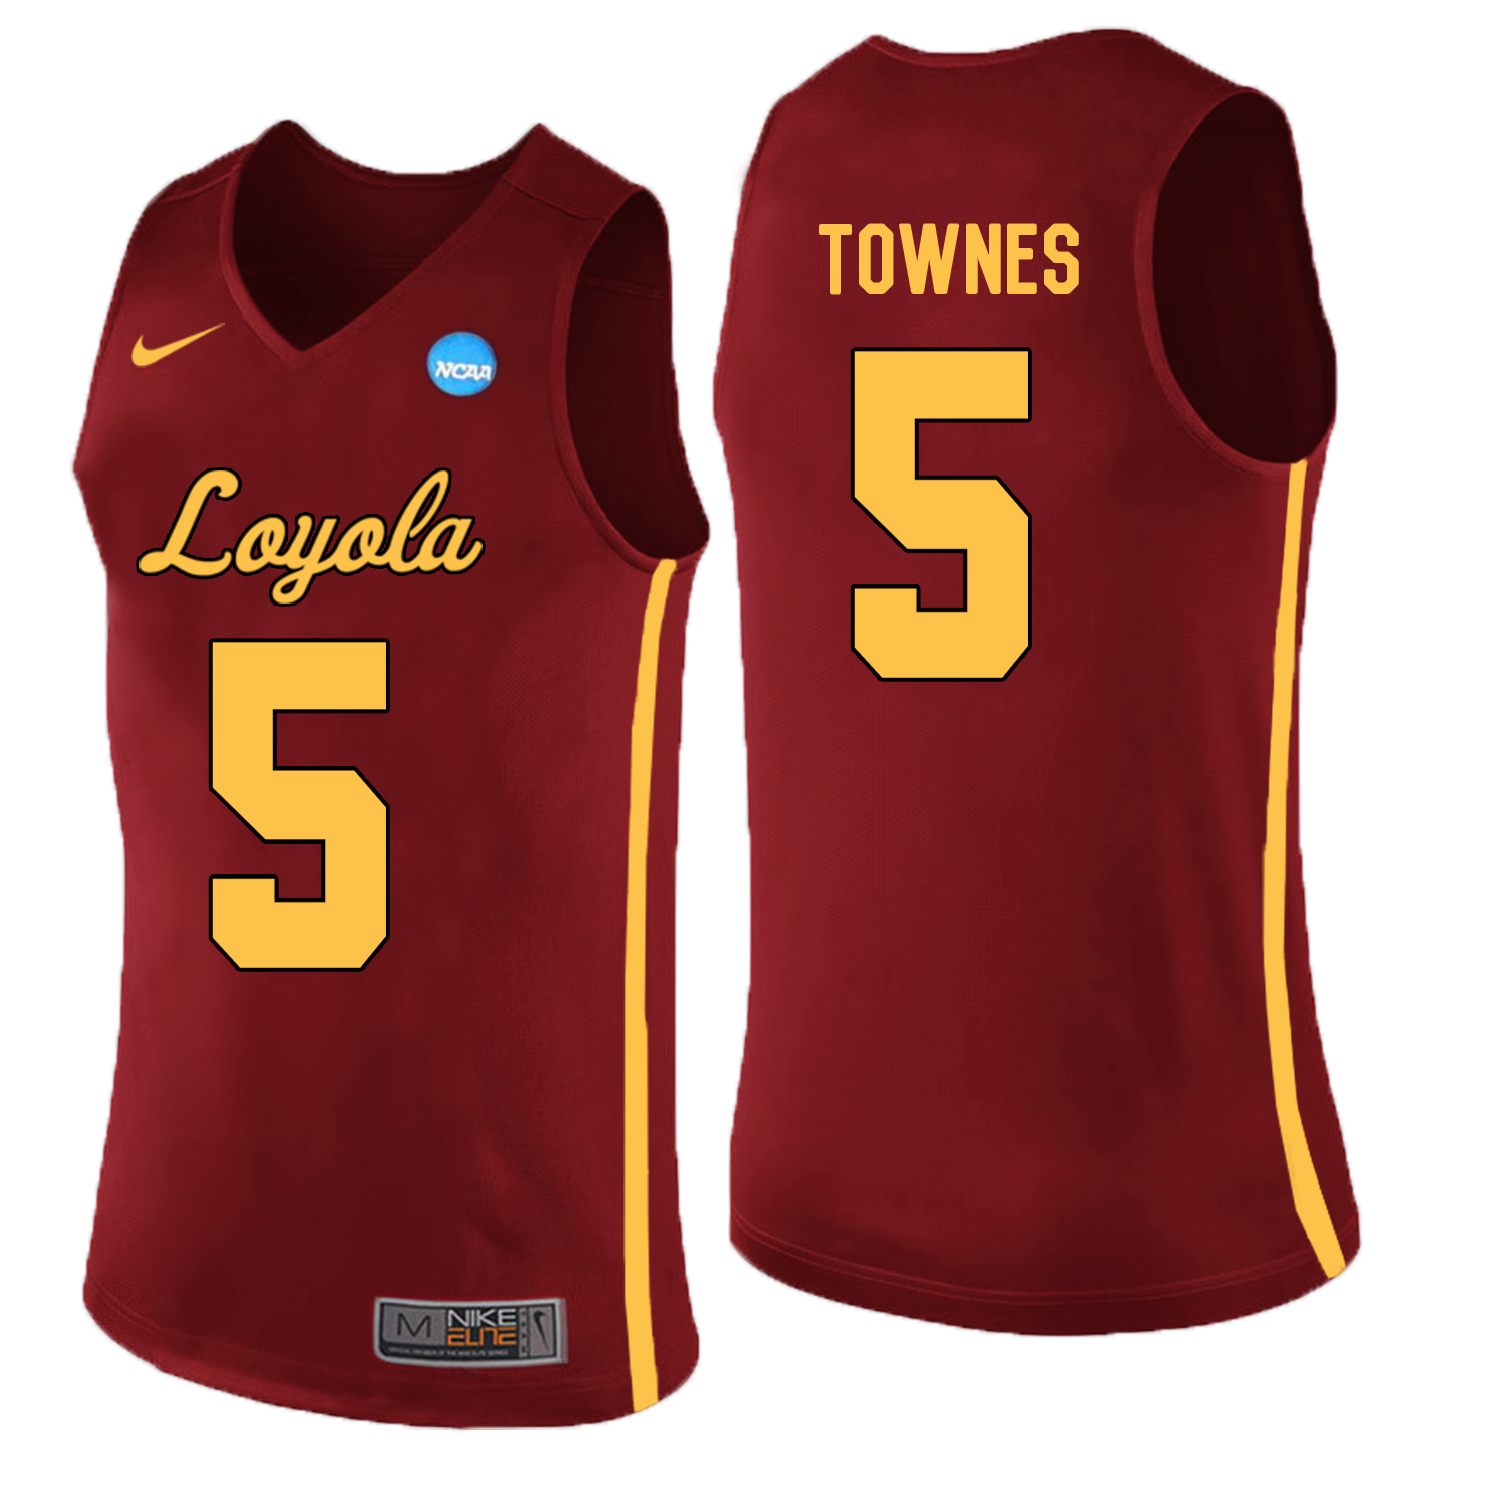 Loyola (Chi) Ramblers 5 Marques Townes Red College Basketball Jersey